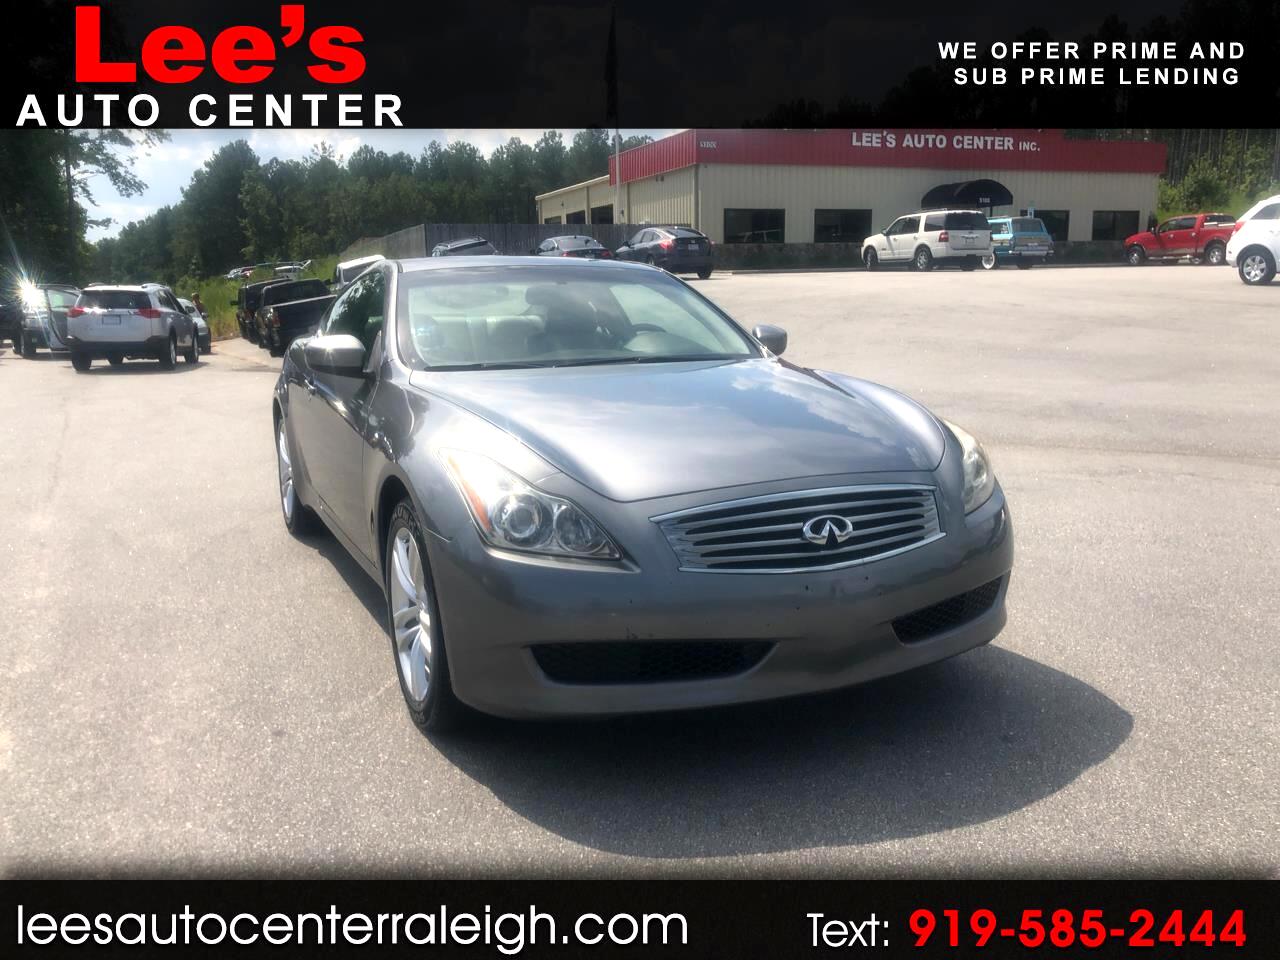 Used 2010 Infiniti G37 Coupe Awd Carfax 1 Owner For Sale In